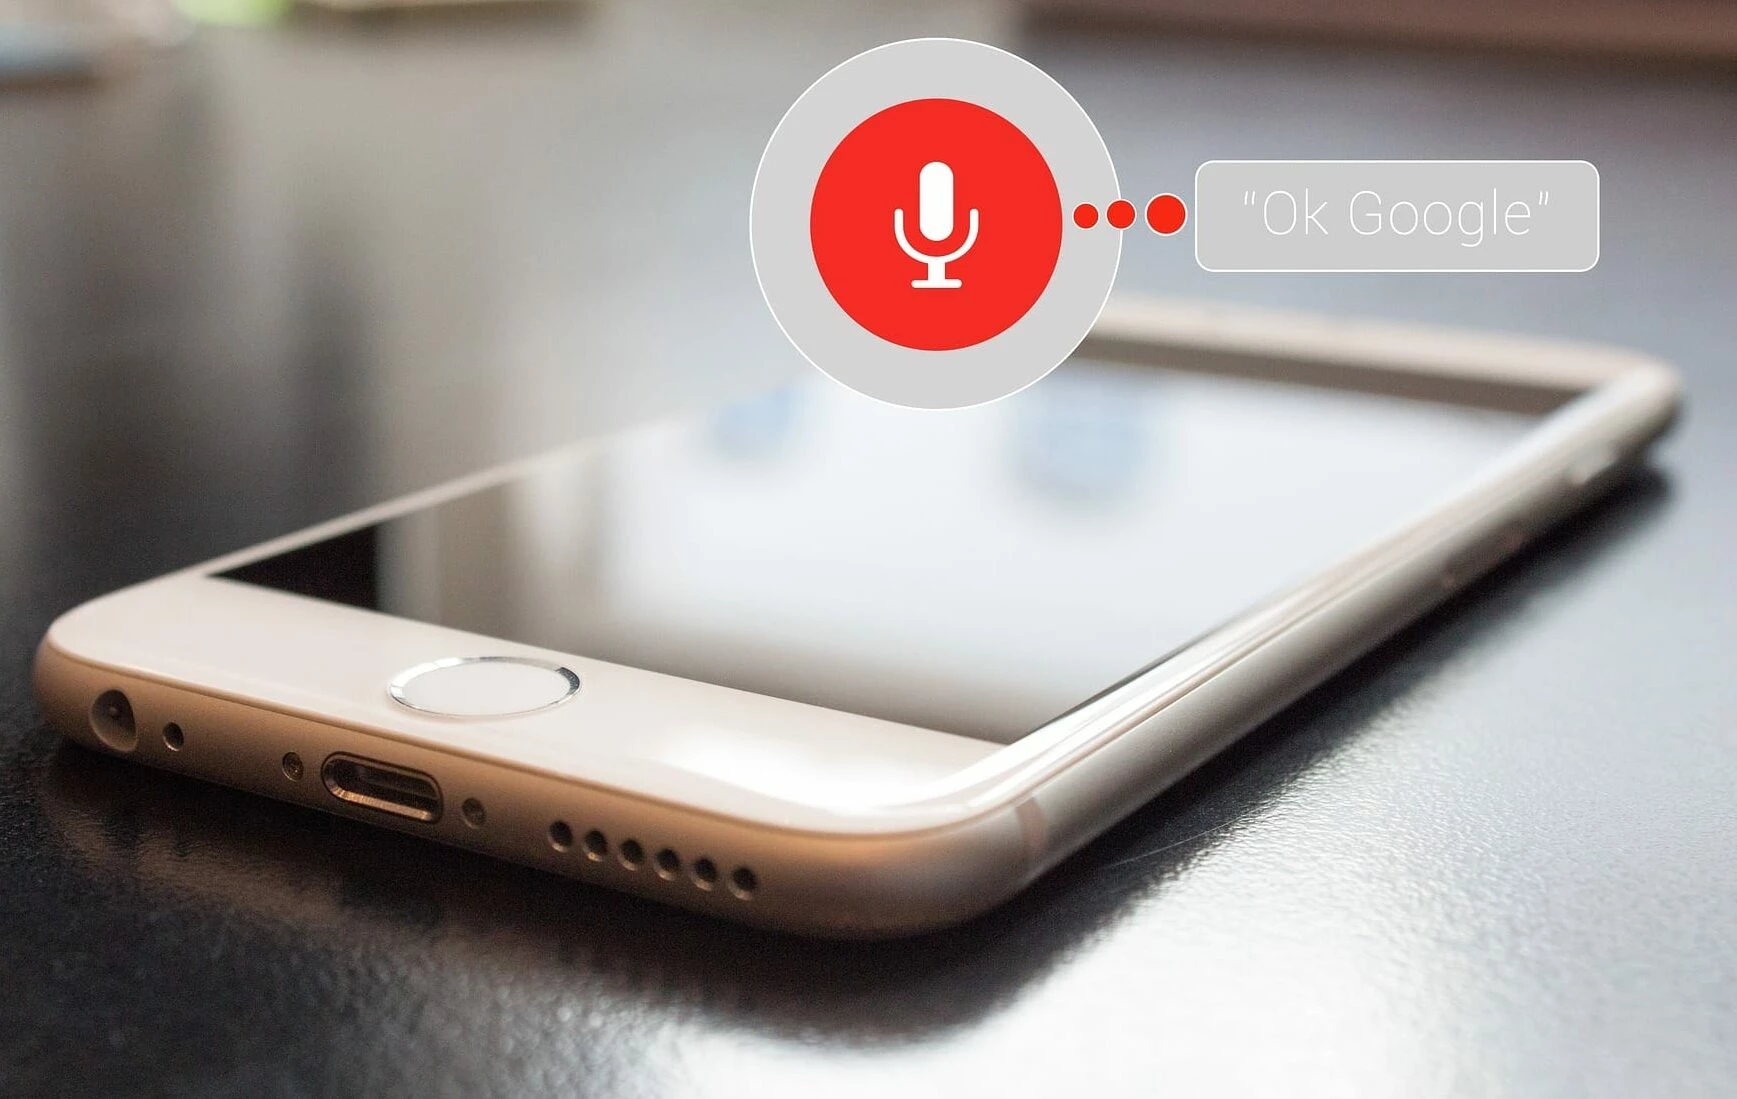 optimizing for voice search and control